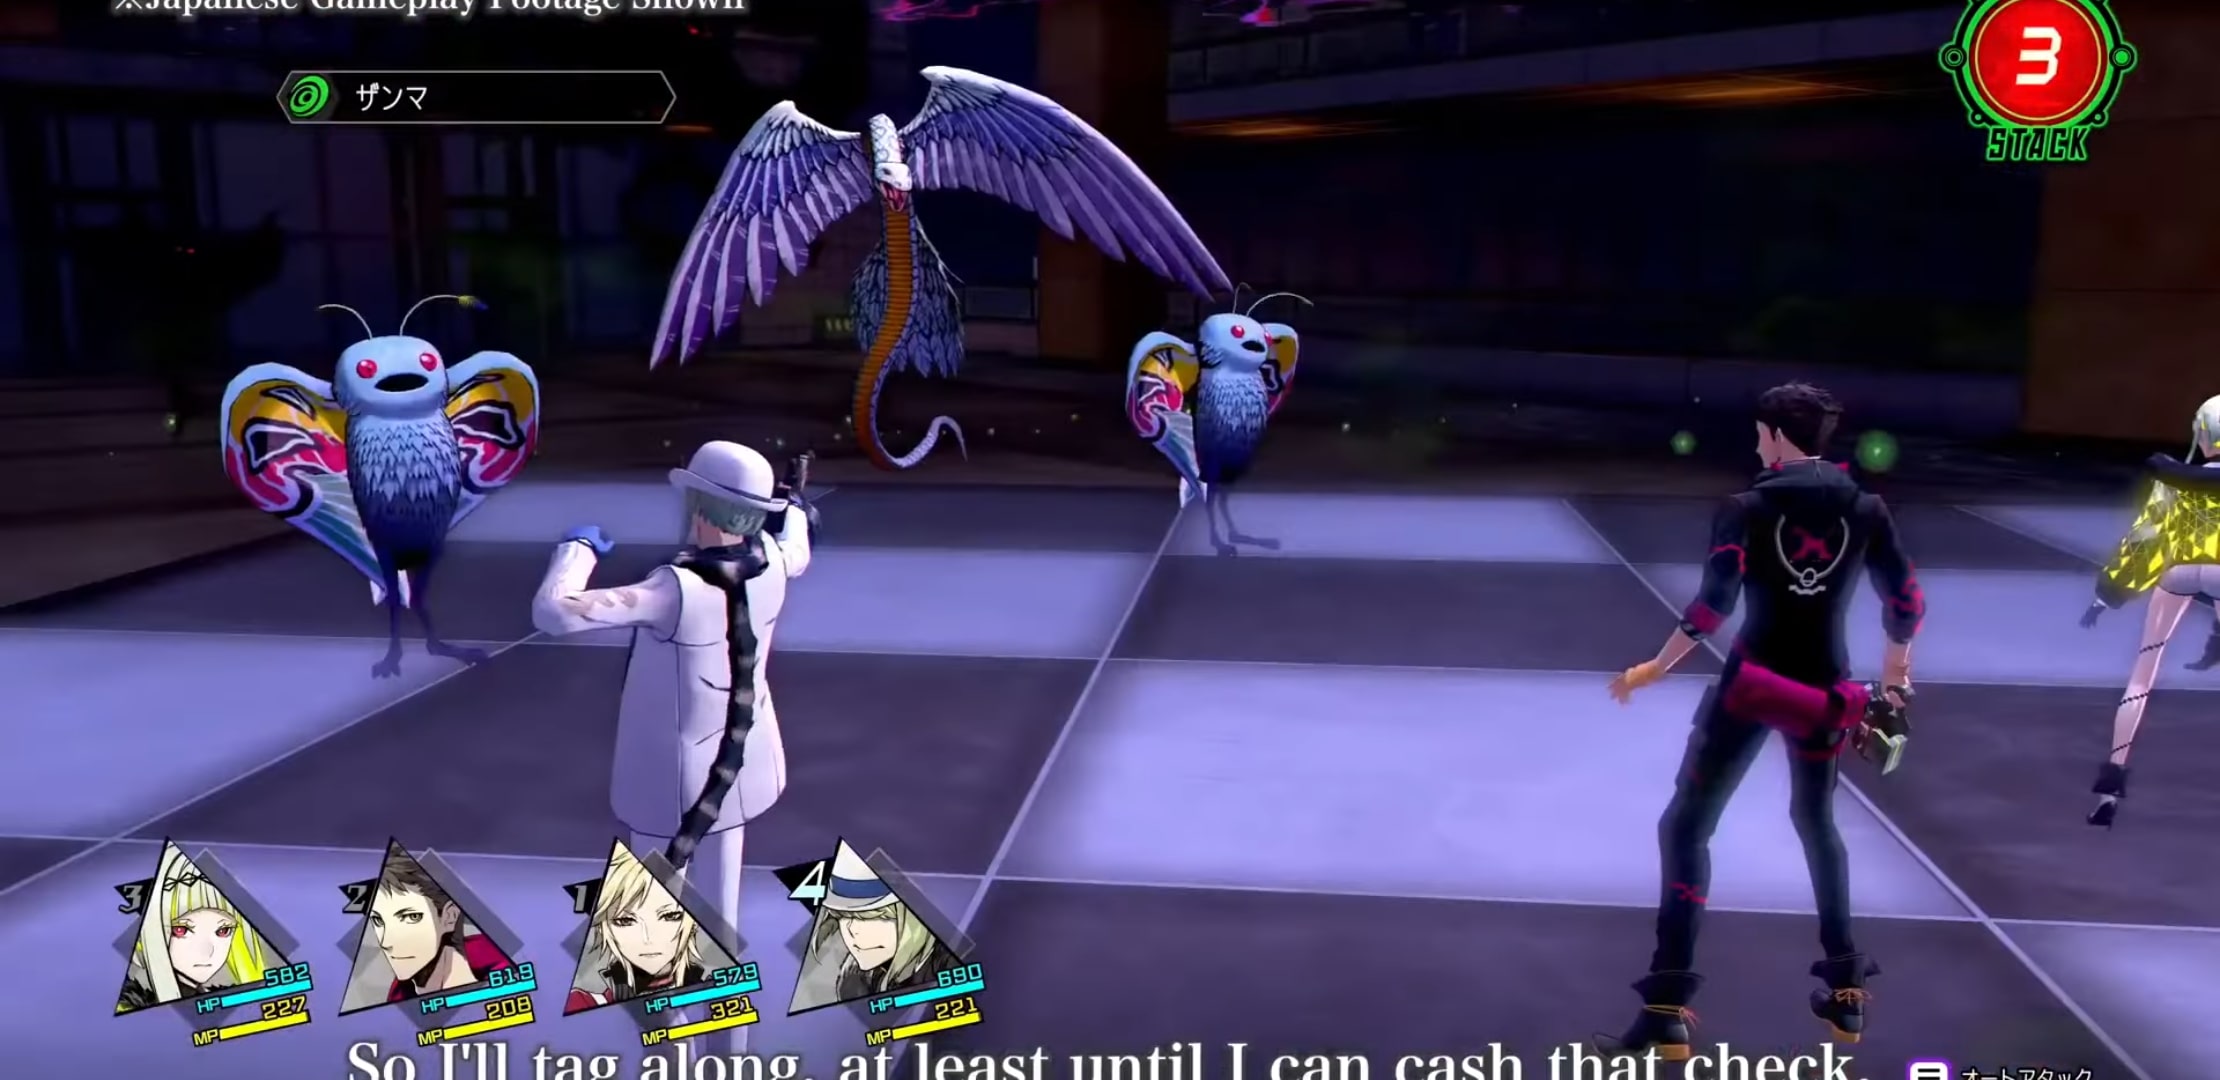 fighting enemies to level up in Soul Hackers 2